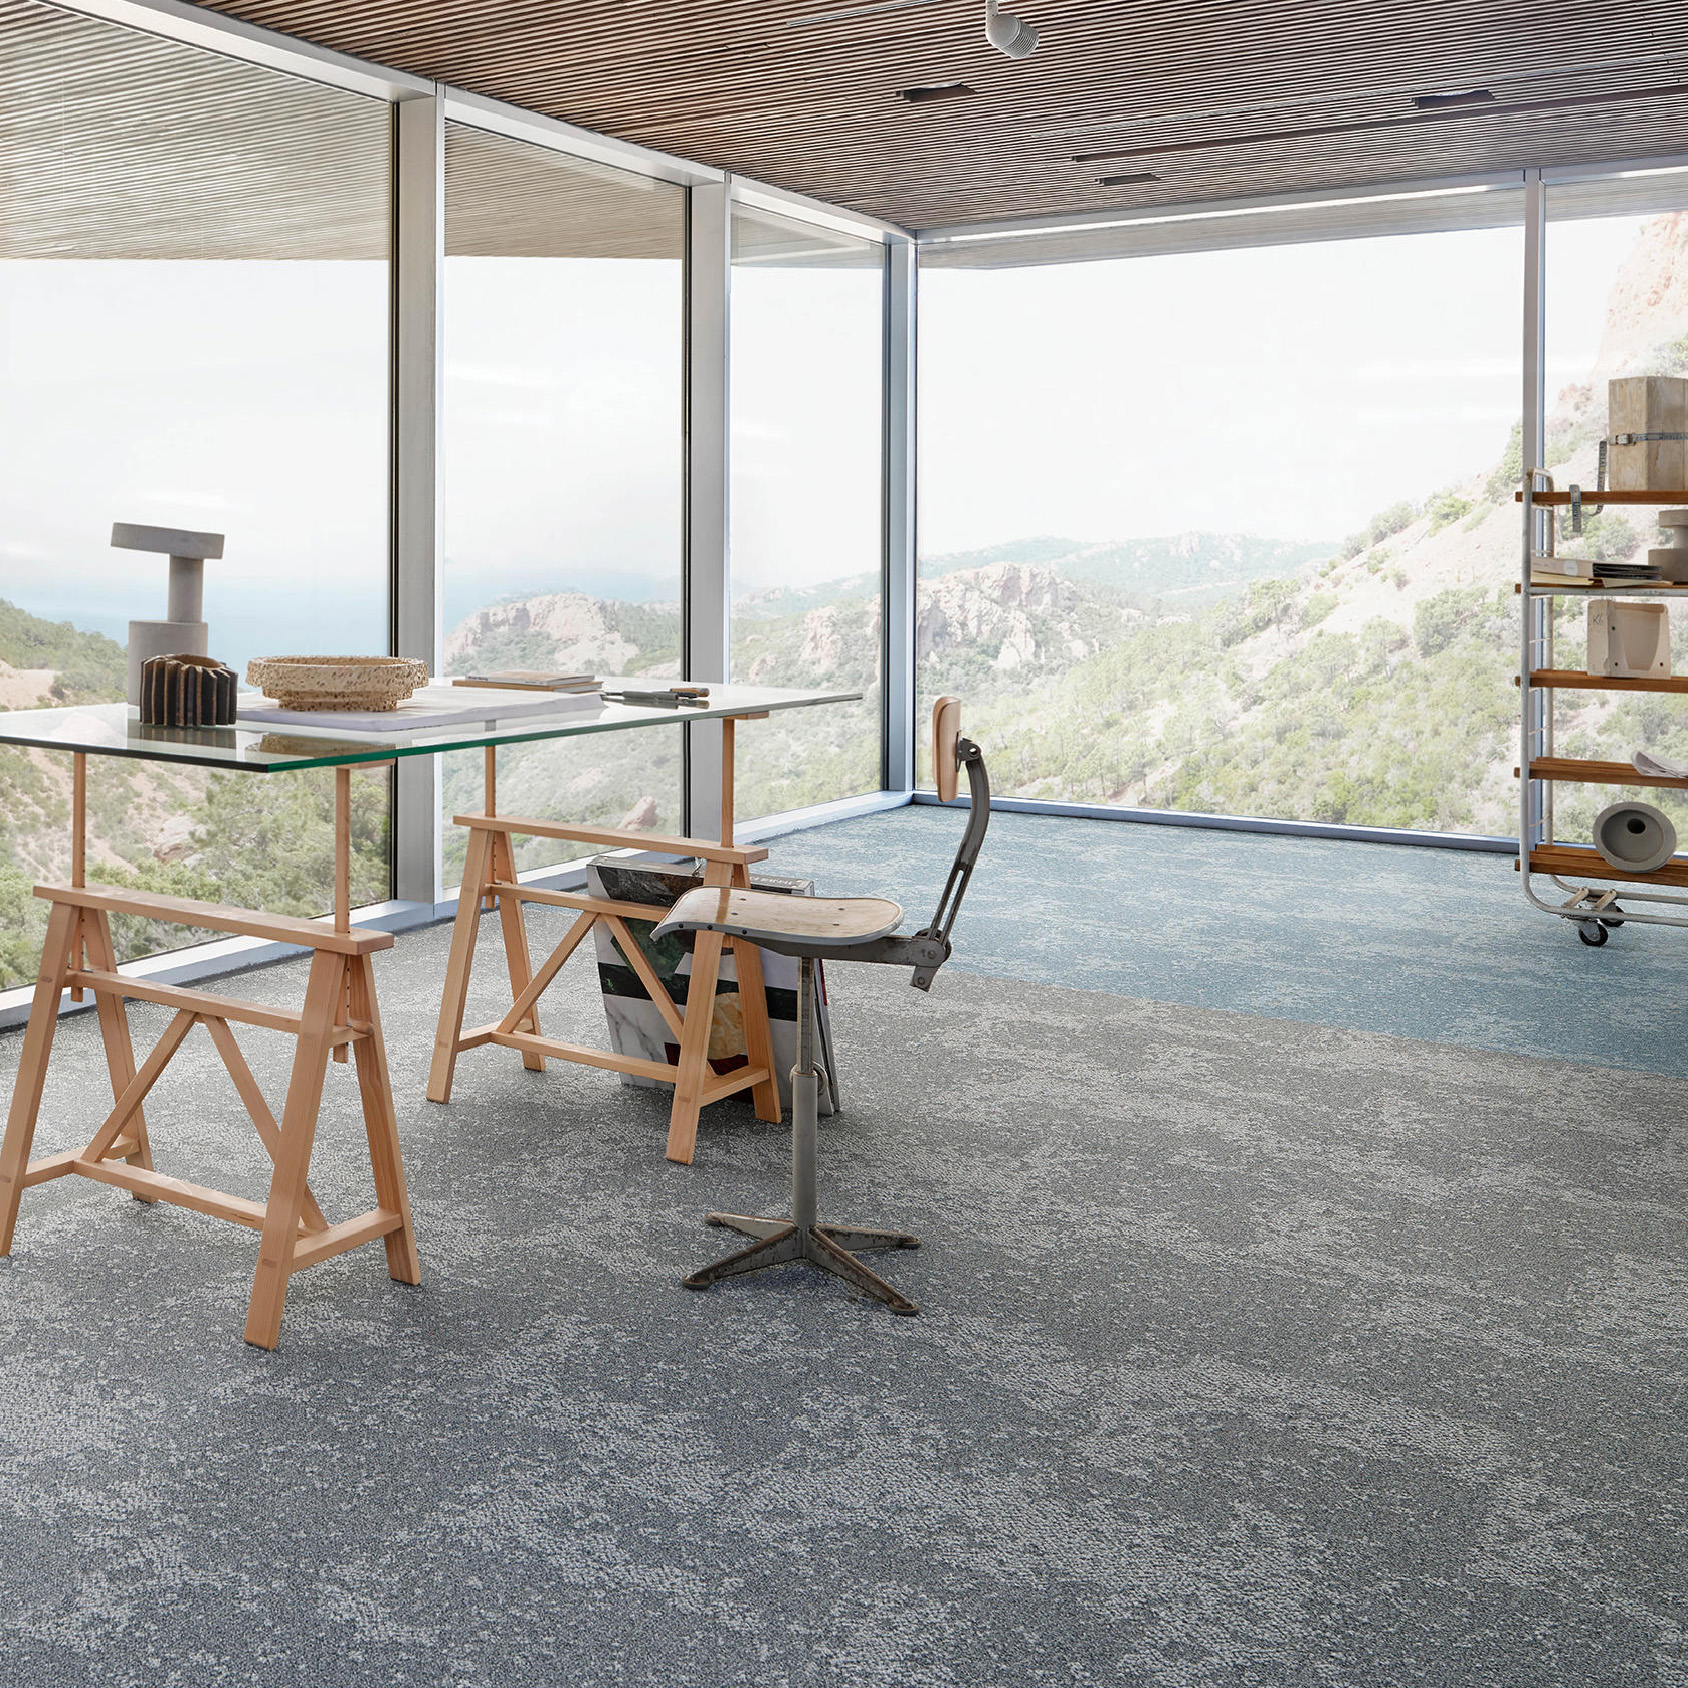 Desso Arable Carpet Tile in modern commercial space overlooking mountains